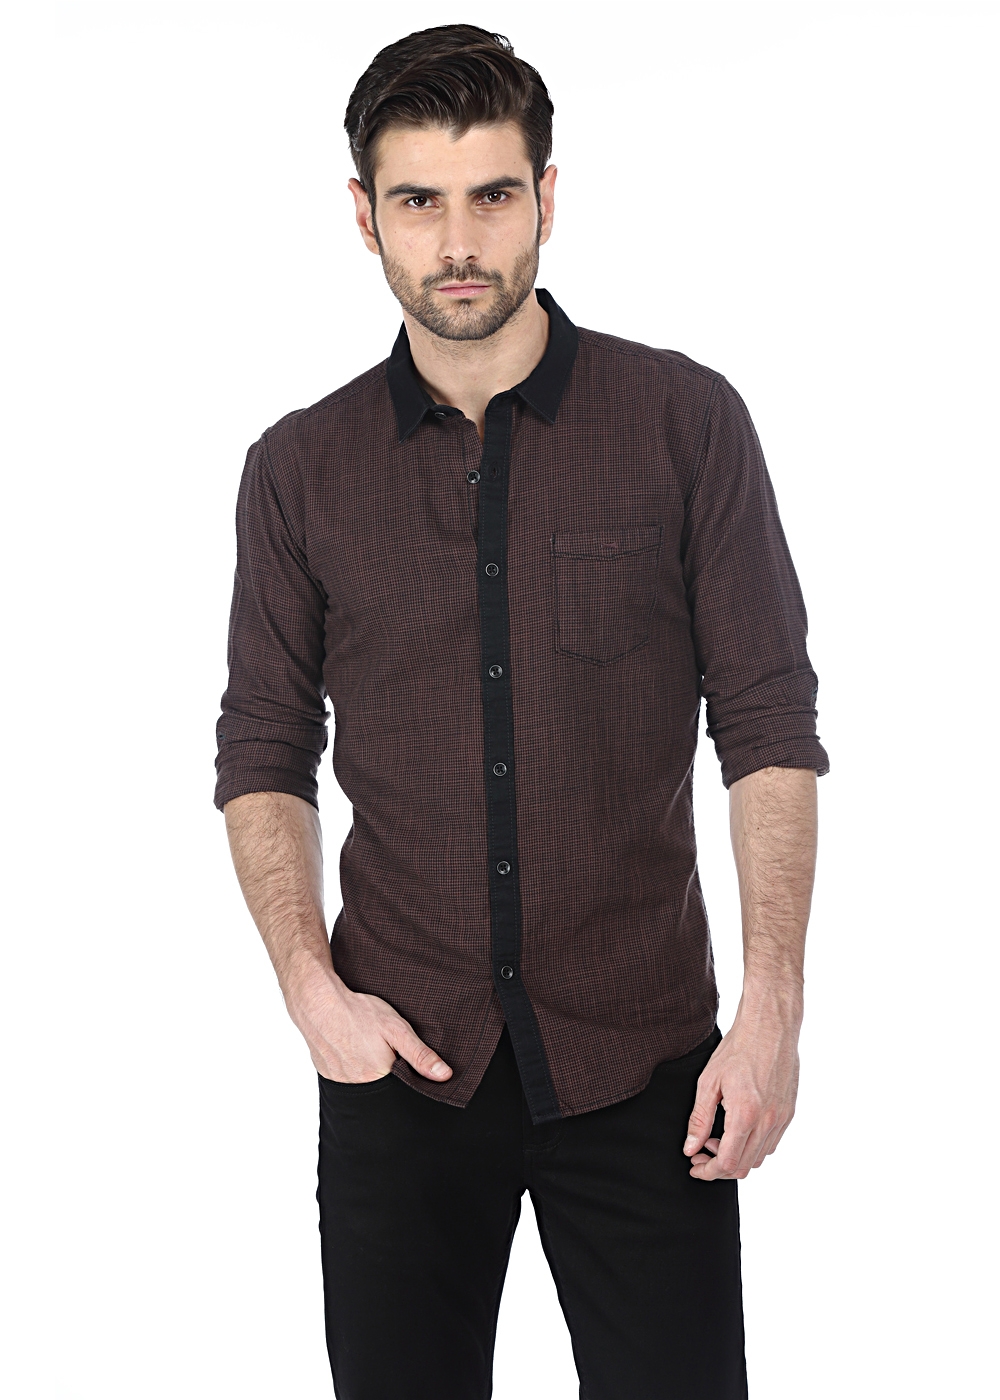 Basics | Slim Fit Smart Casual Dark Earth Twill Weave Houndstooth Shirt with Black Collar